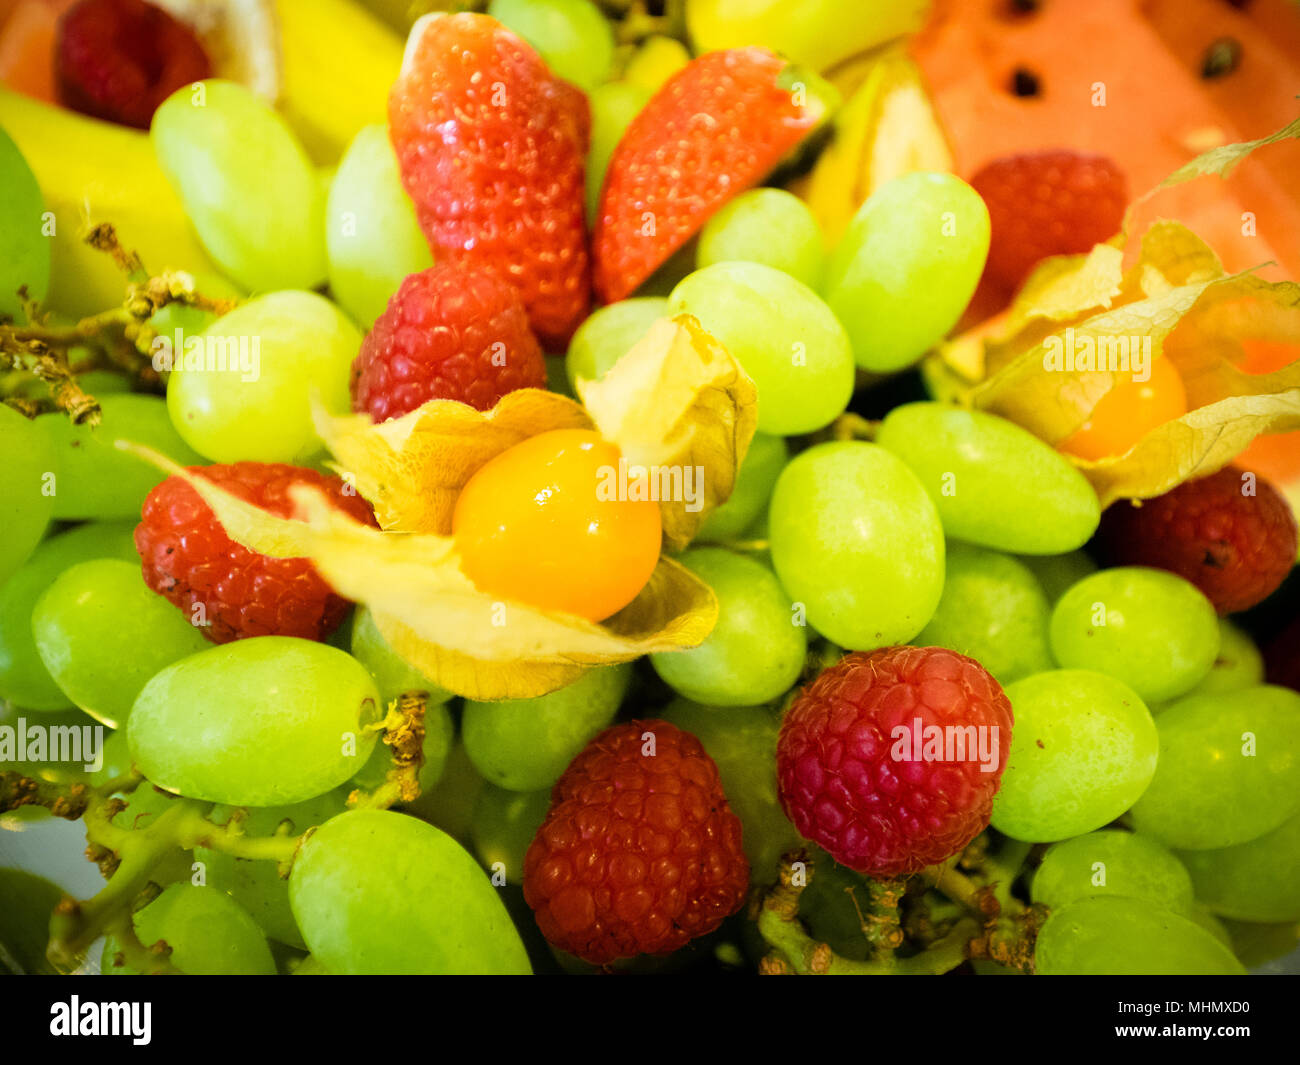 The colorful fruit plate with grapes, strawberries, physalis, mango and melon Stock Photo